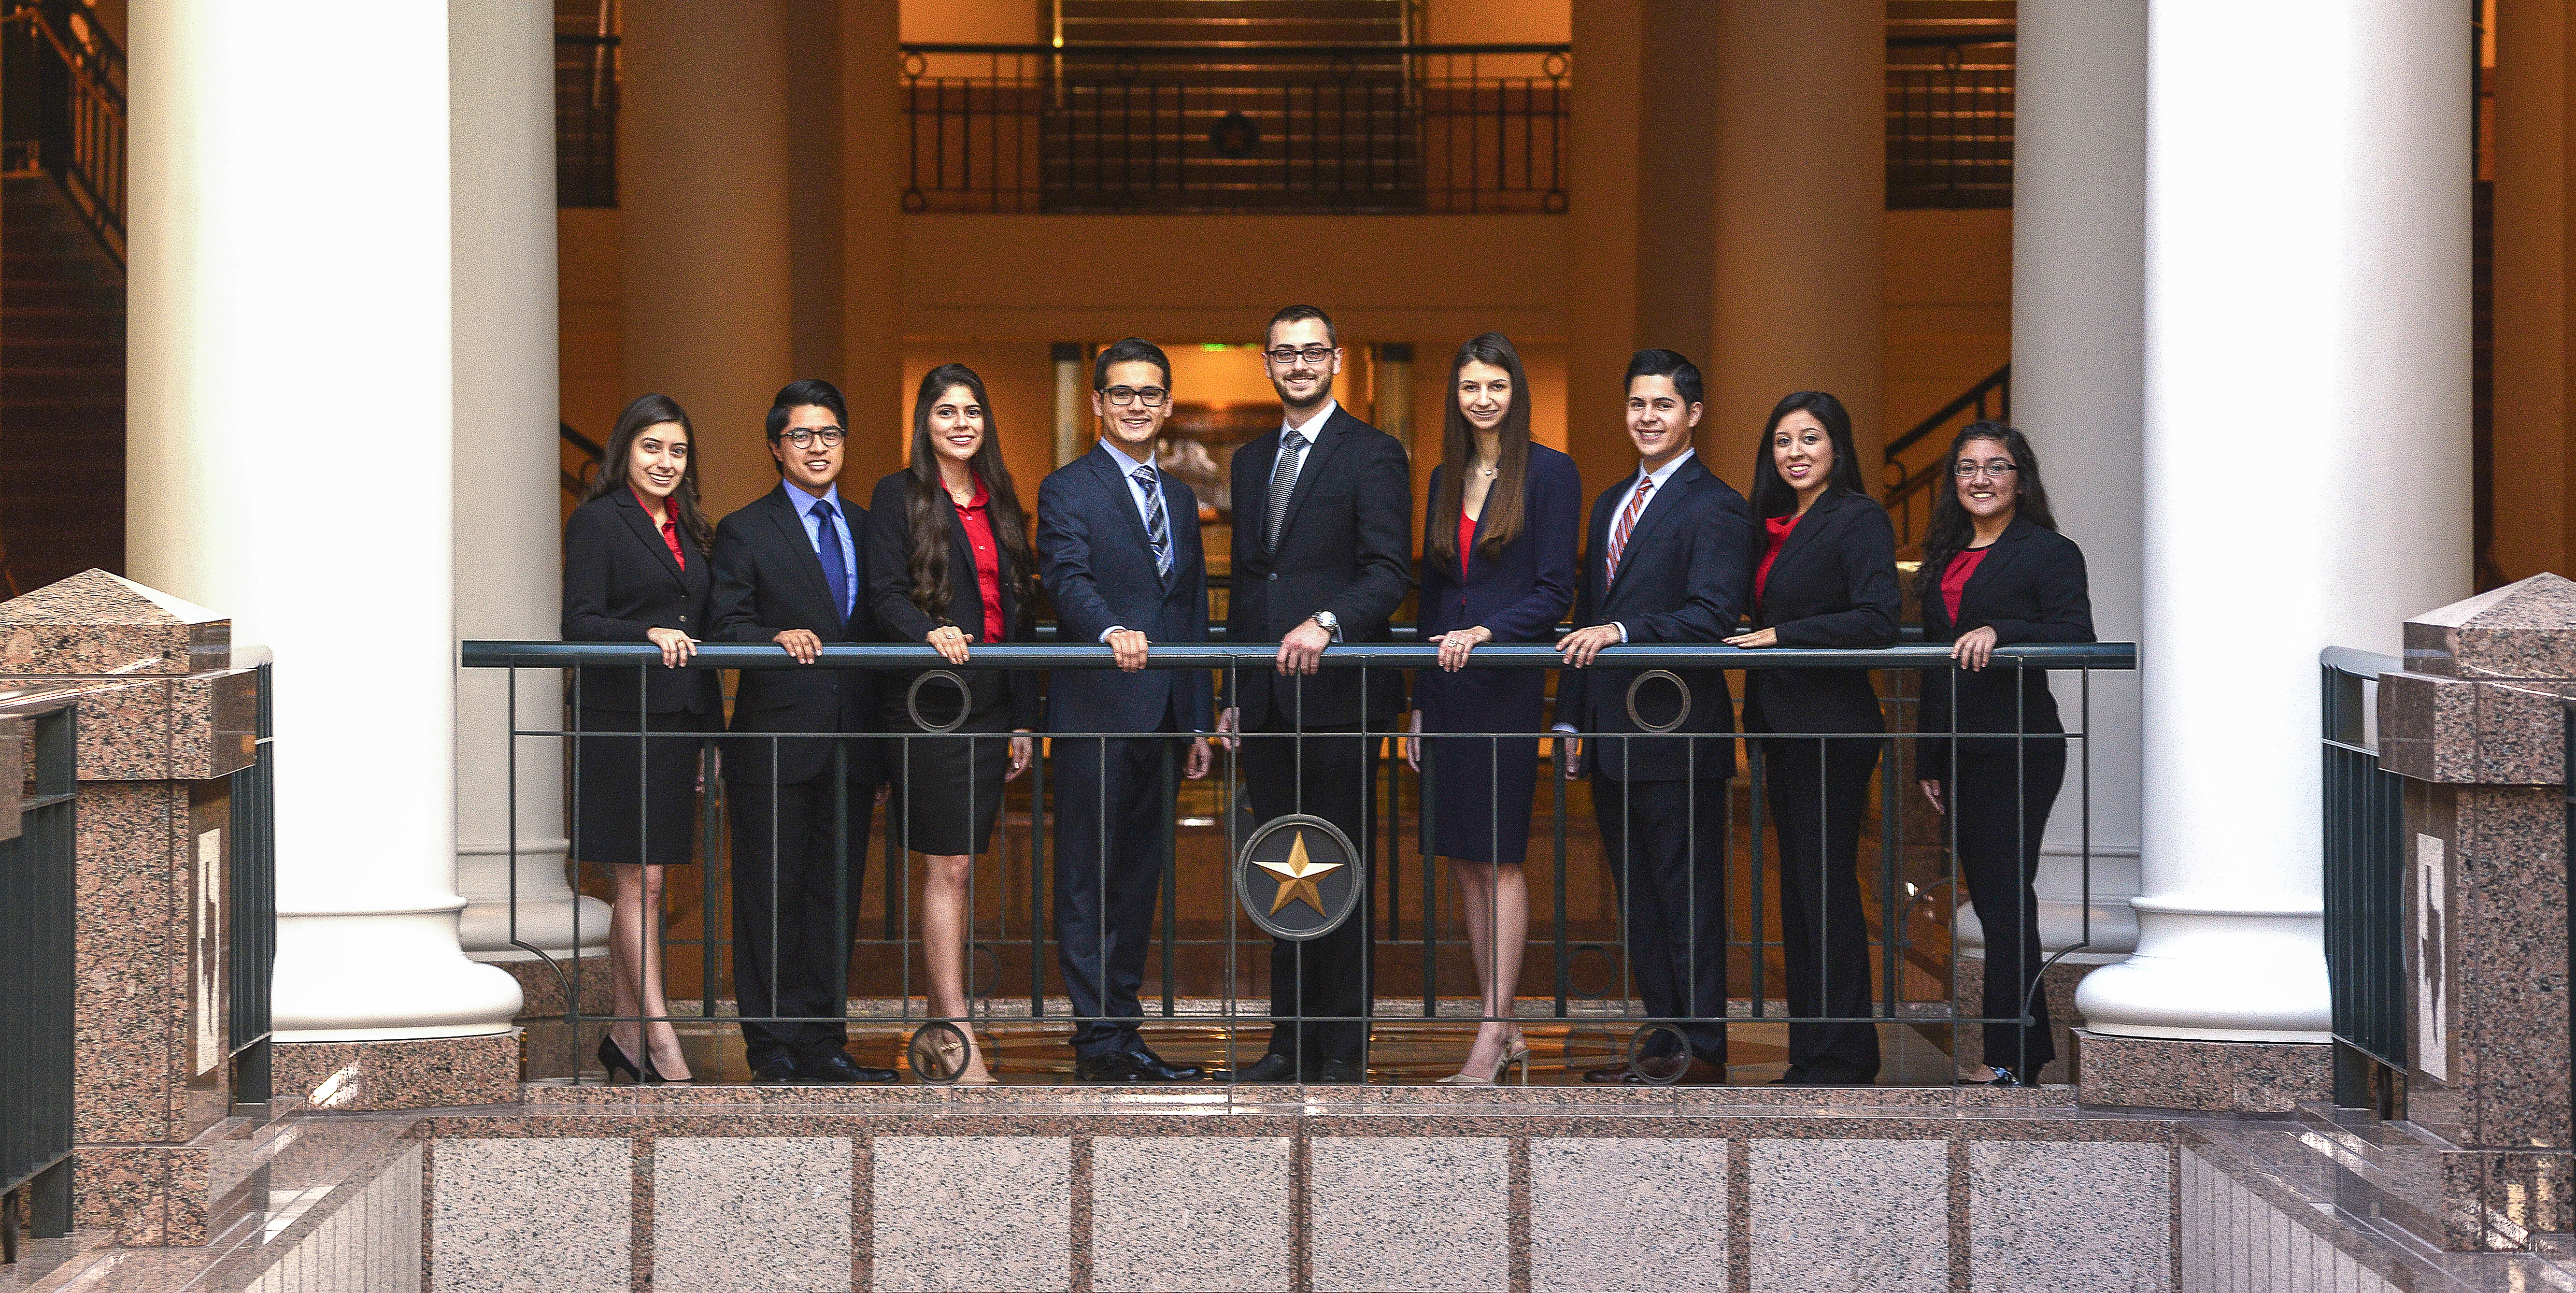 LEAP Center students intern for the capital during the 83rd Texas Legislature